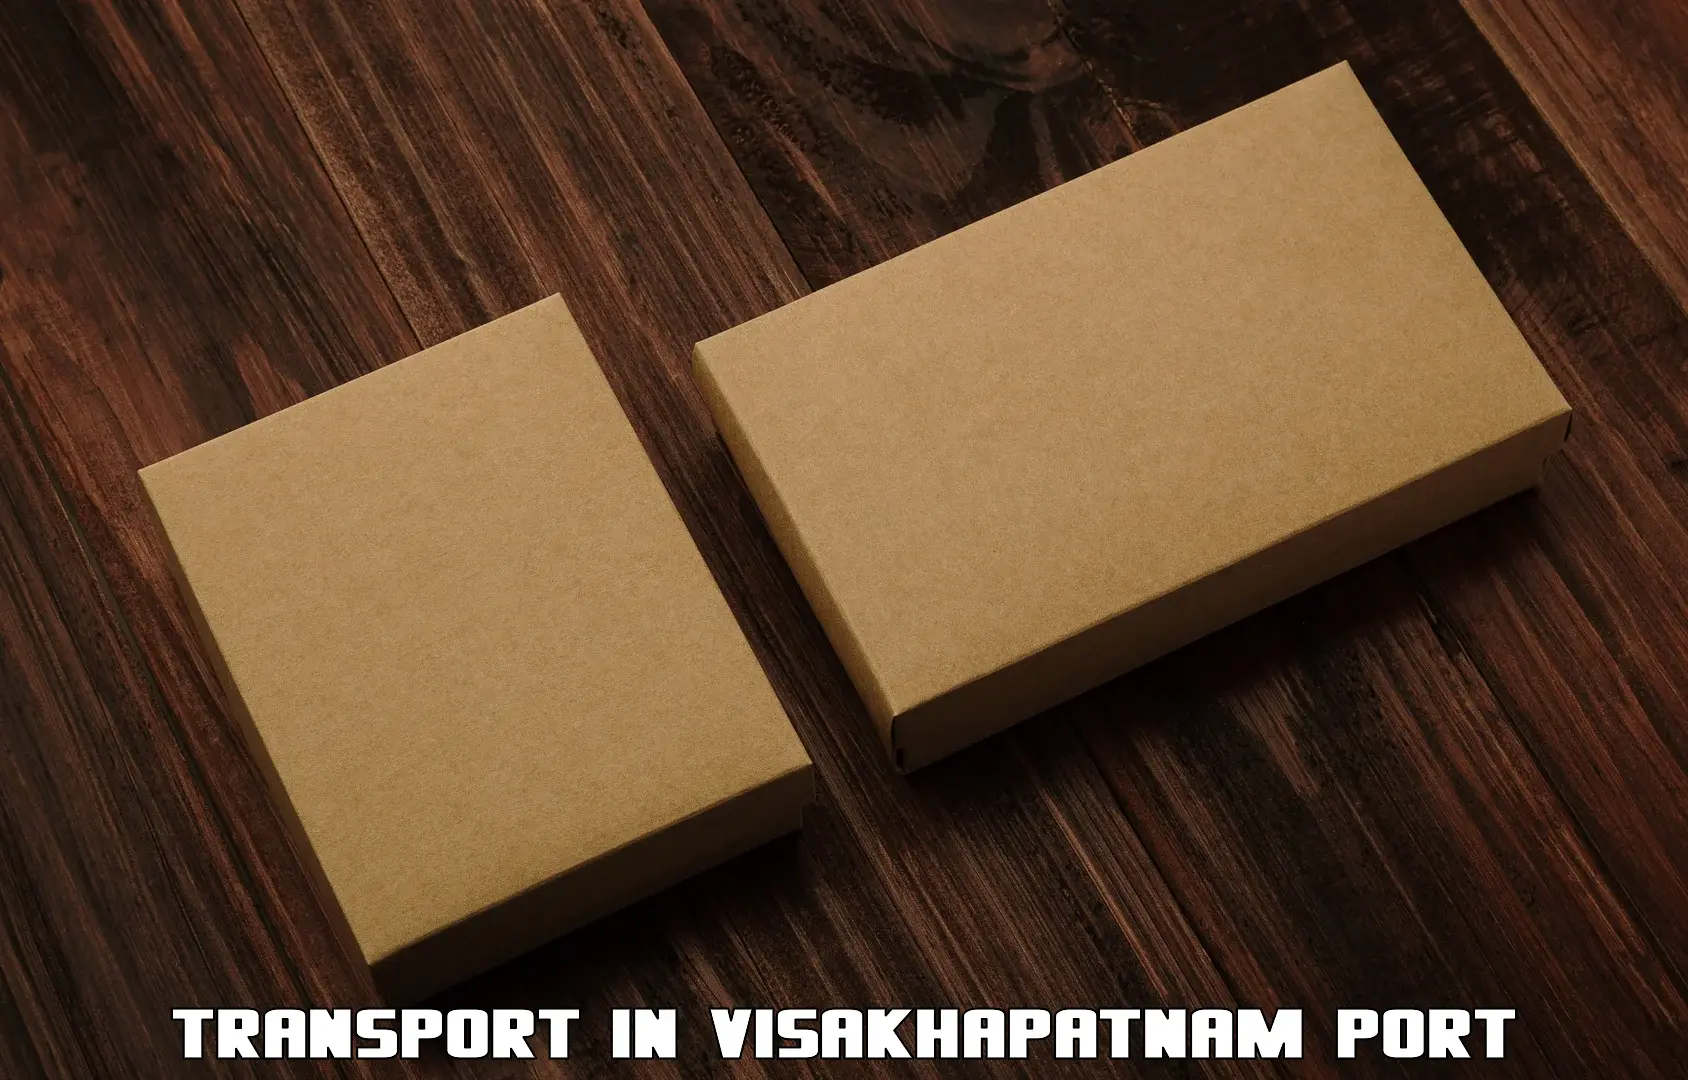 Nearby transport service in Visakhapatnam Port